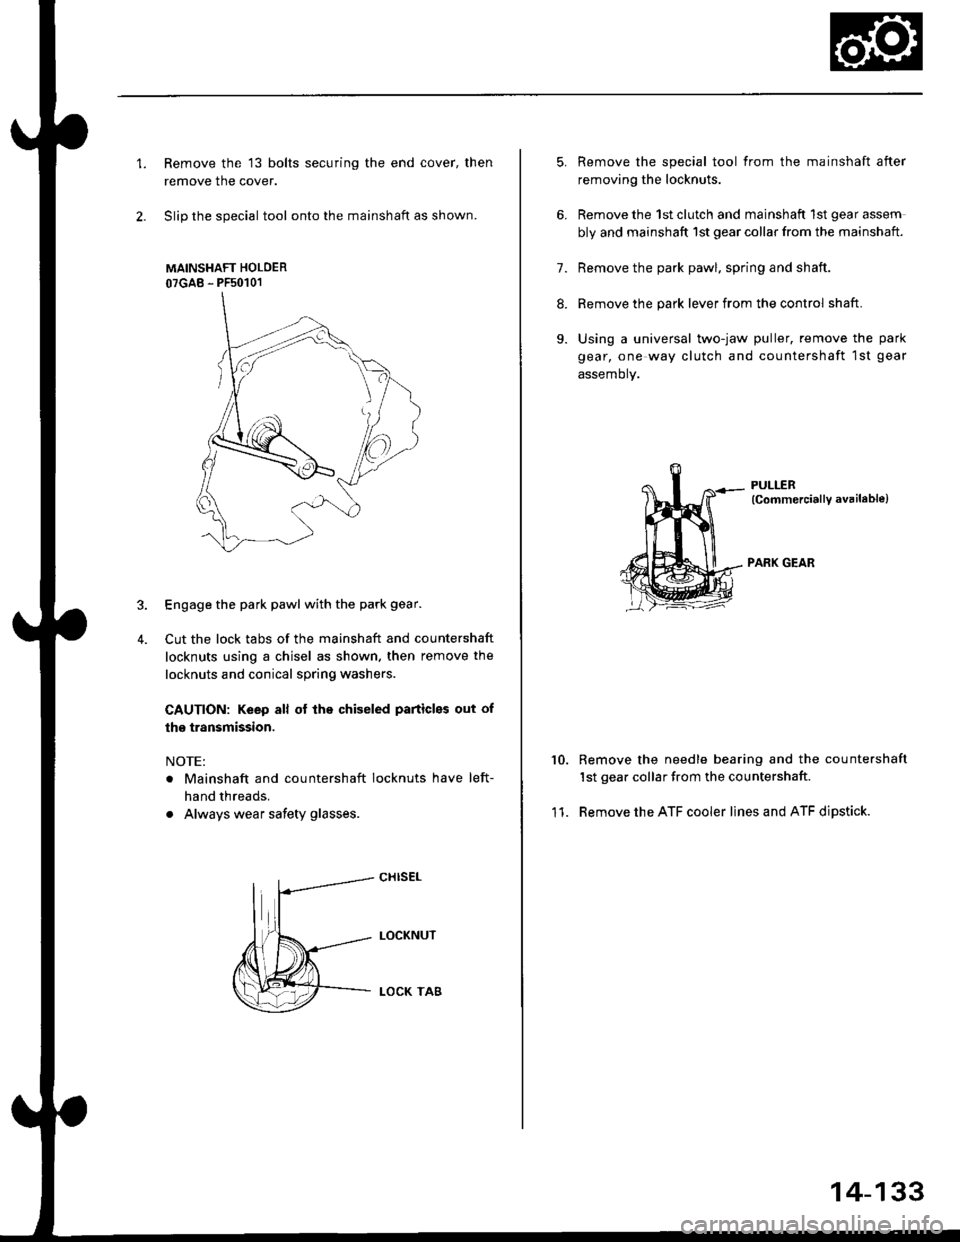 HONDA CIVIC 1997 6.G Workshop Manual 1.Remove the 13 bolts securing the end cover, then
remove the cover.
Slip the special tool onto the mainshaft as shown.
MAINSHAFT HOLOER
07GAB - PFs0101
Engage the park pawl with the park gear.
Cut th